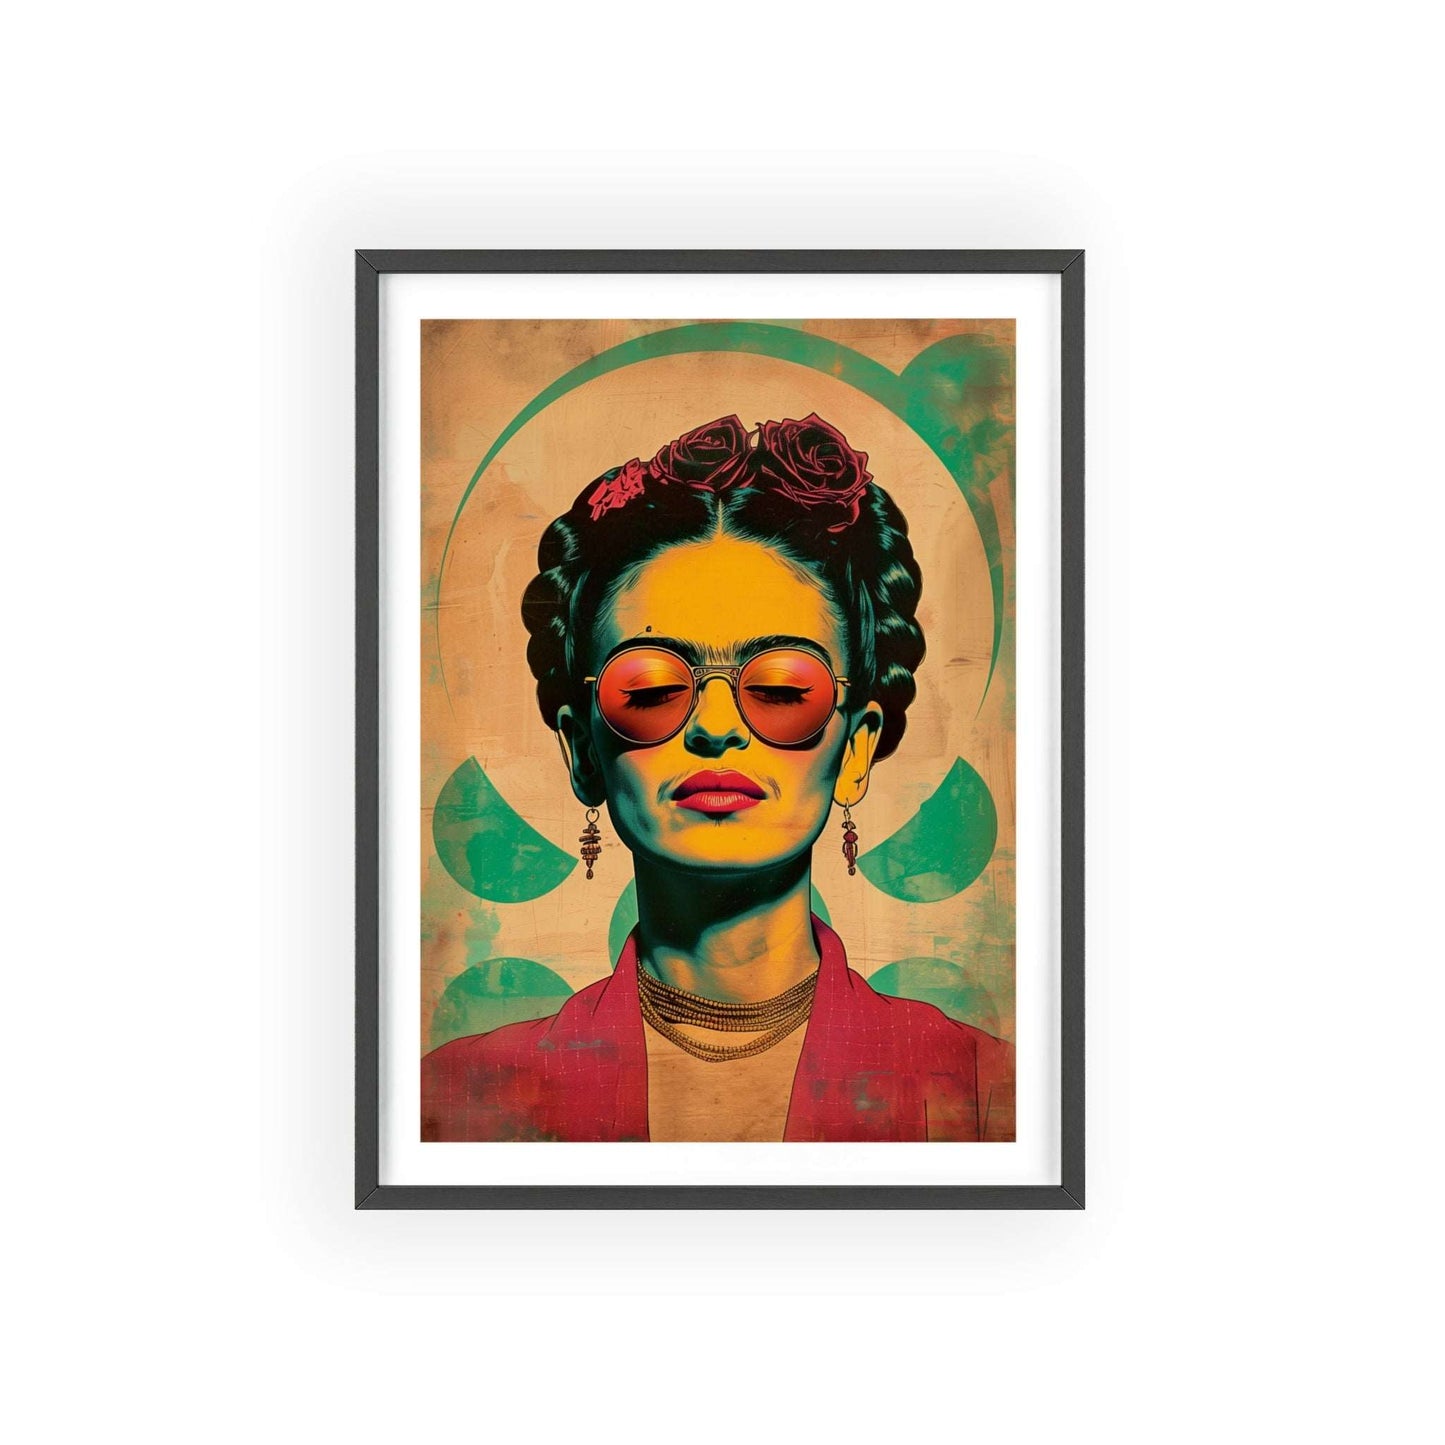 Framed poster featuring a high-resolution vector illustration of Frida Kahlo in a Brian Kesinger-inspired style. Frida has a bold, flat color design with high contrast and wears rose-colored sunglasses. The background is flat and uses warm tones. The poster is centered in the composition.